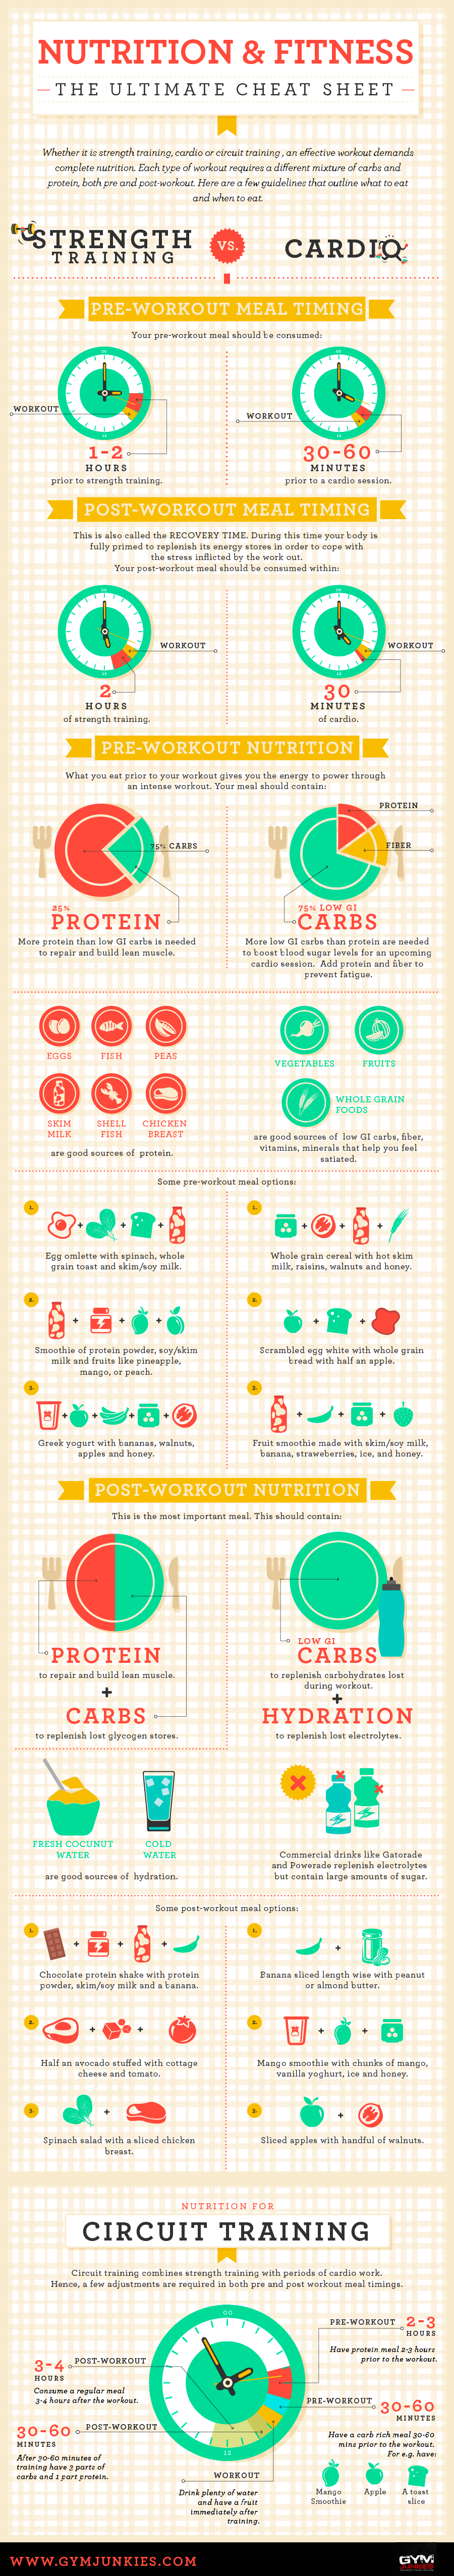 Your Ultimate Cheat Sheet On Nutrition & Fitness Infographic